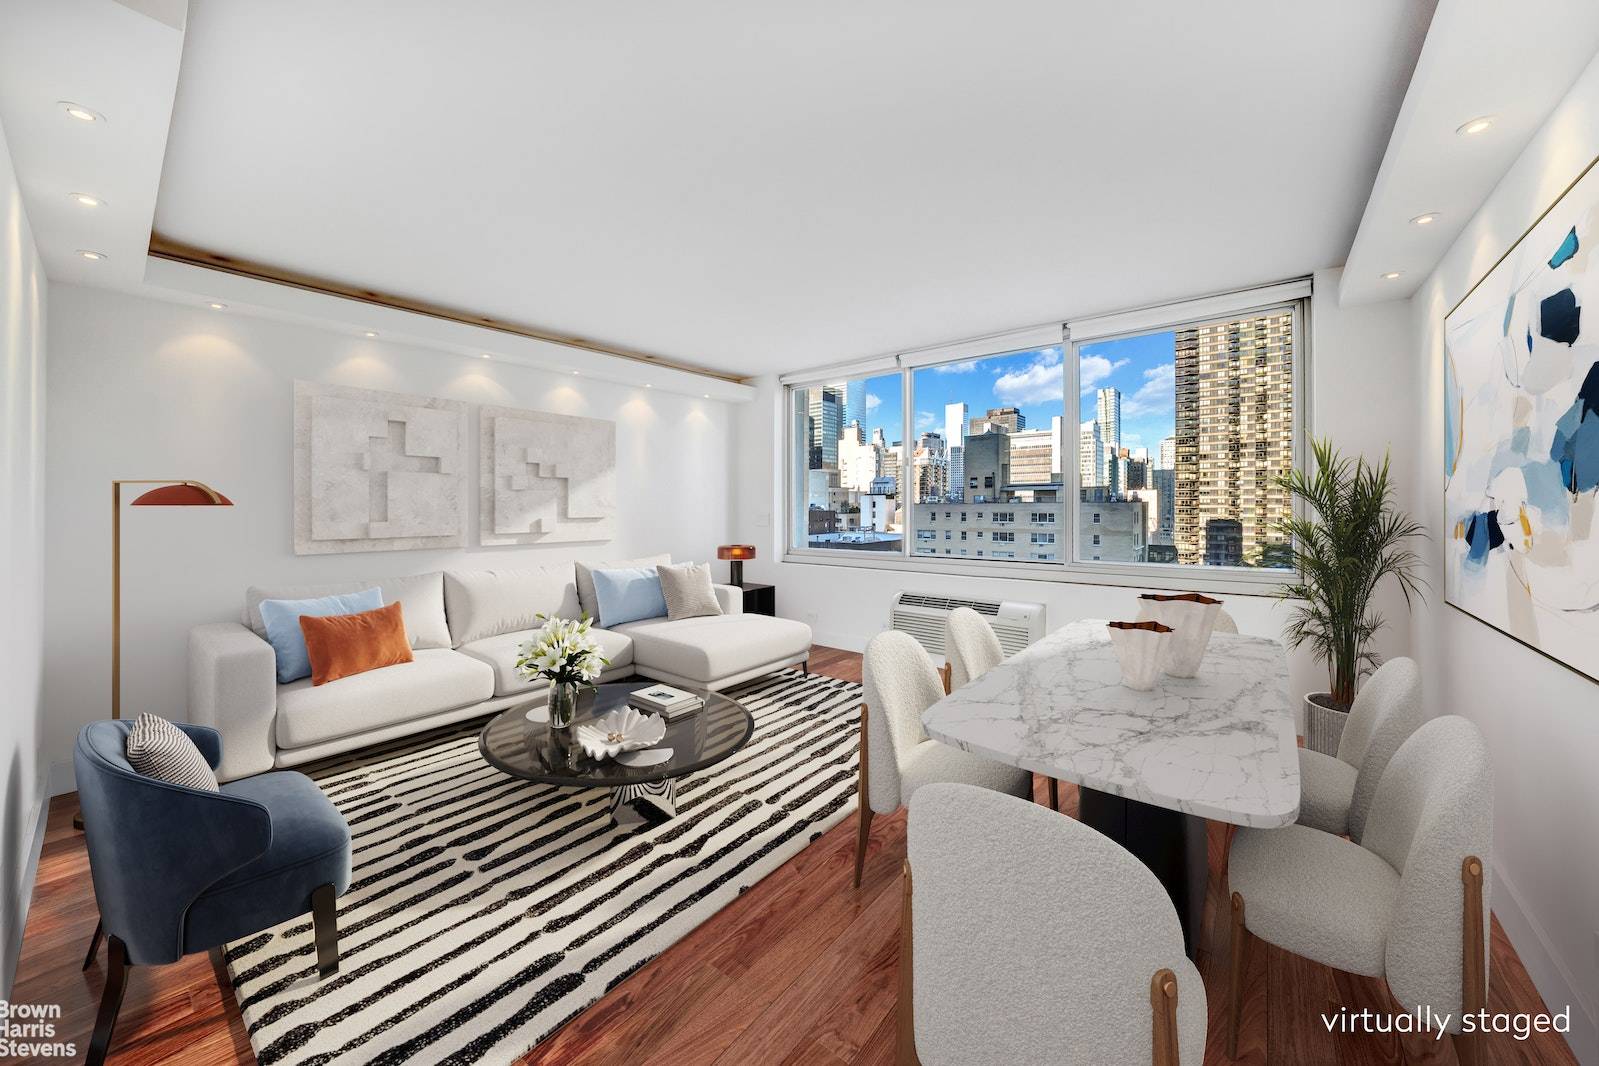 Welcome to unit 21E at 333 East 45th Street, your personal oasis in the heart of Midtown East.